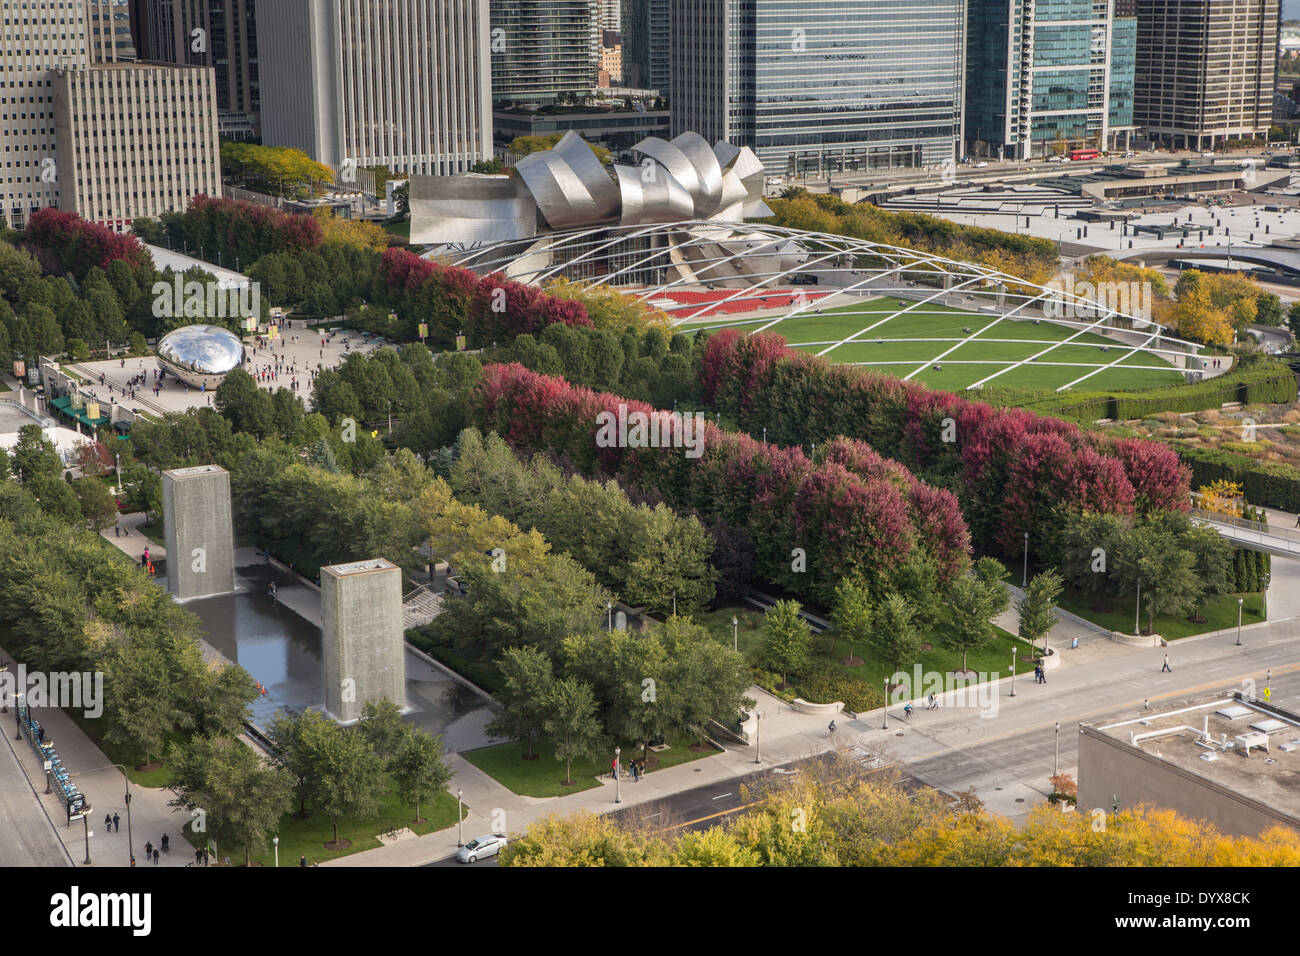 Aerial view of Millennium Park from the Cliff Dwellers Club in Chicago, Illinois USA Stock Photo